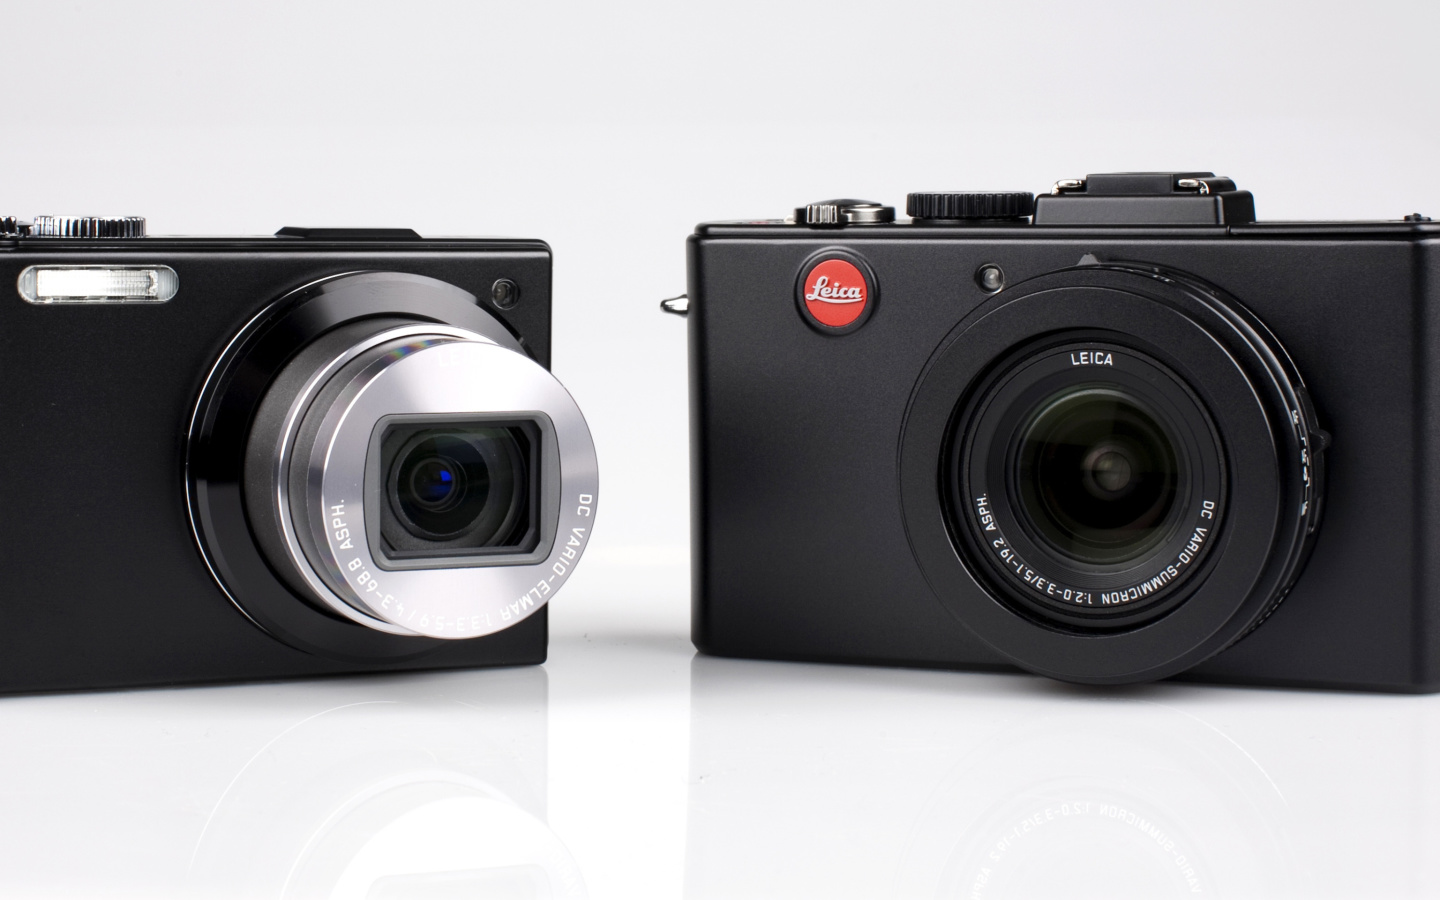 Leica D Lux 5 and Leica V LUX 1 screenshot #1 1440x900